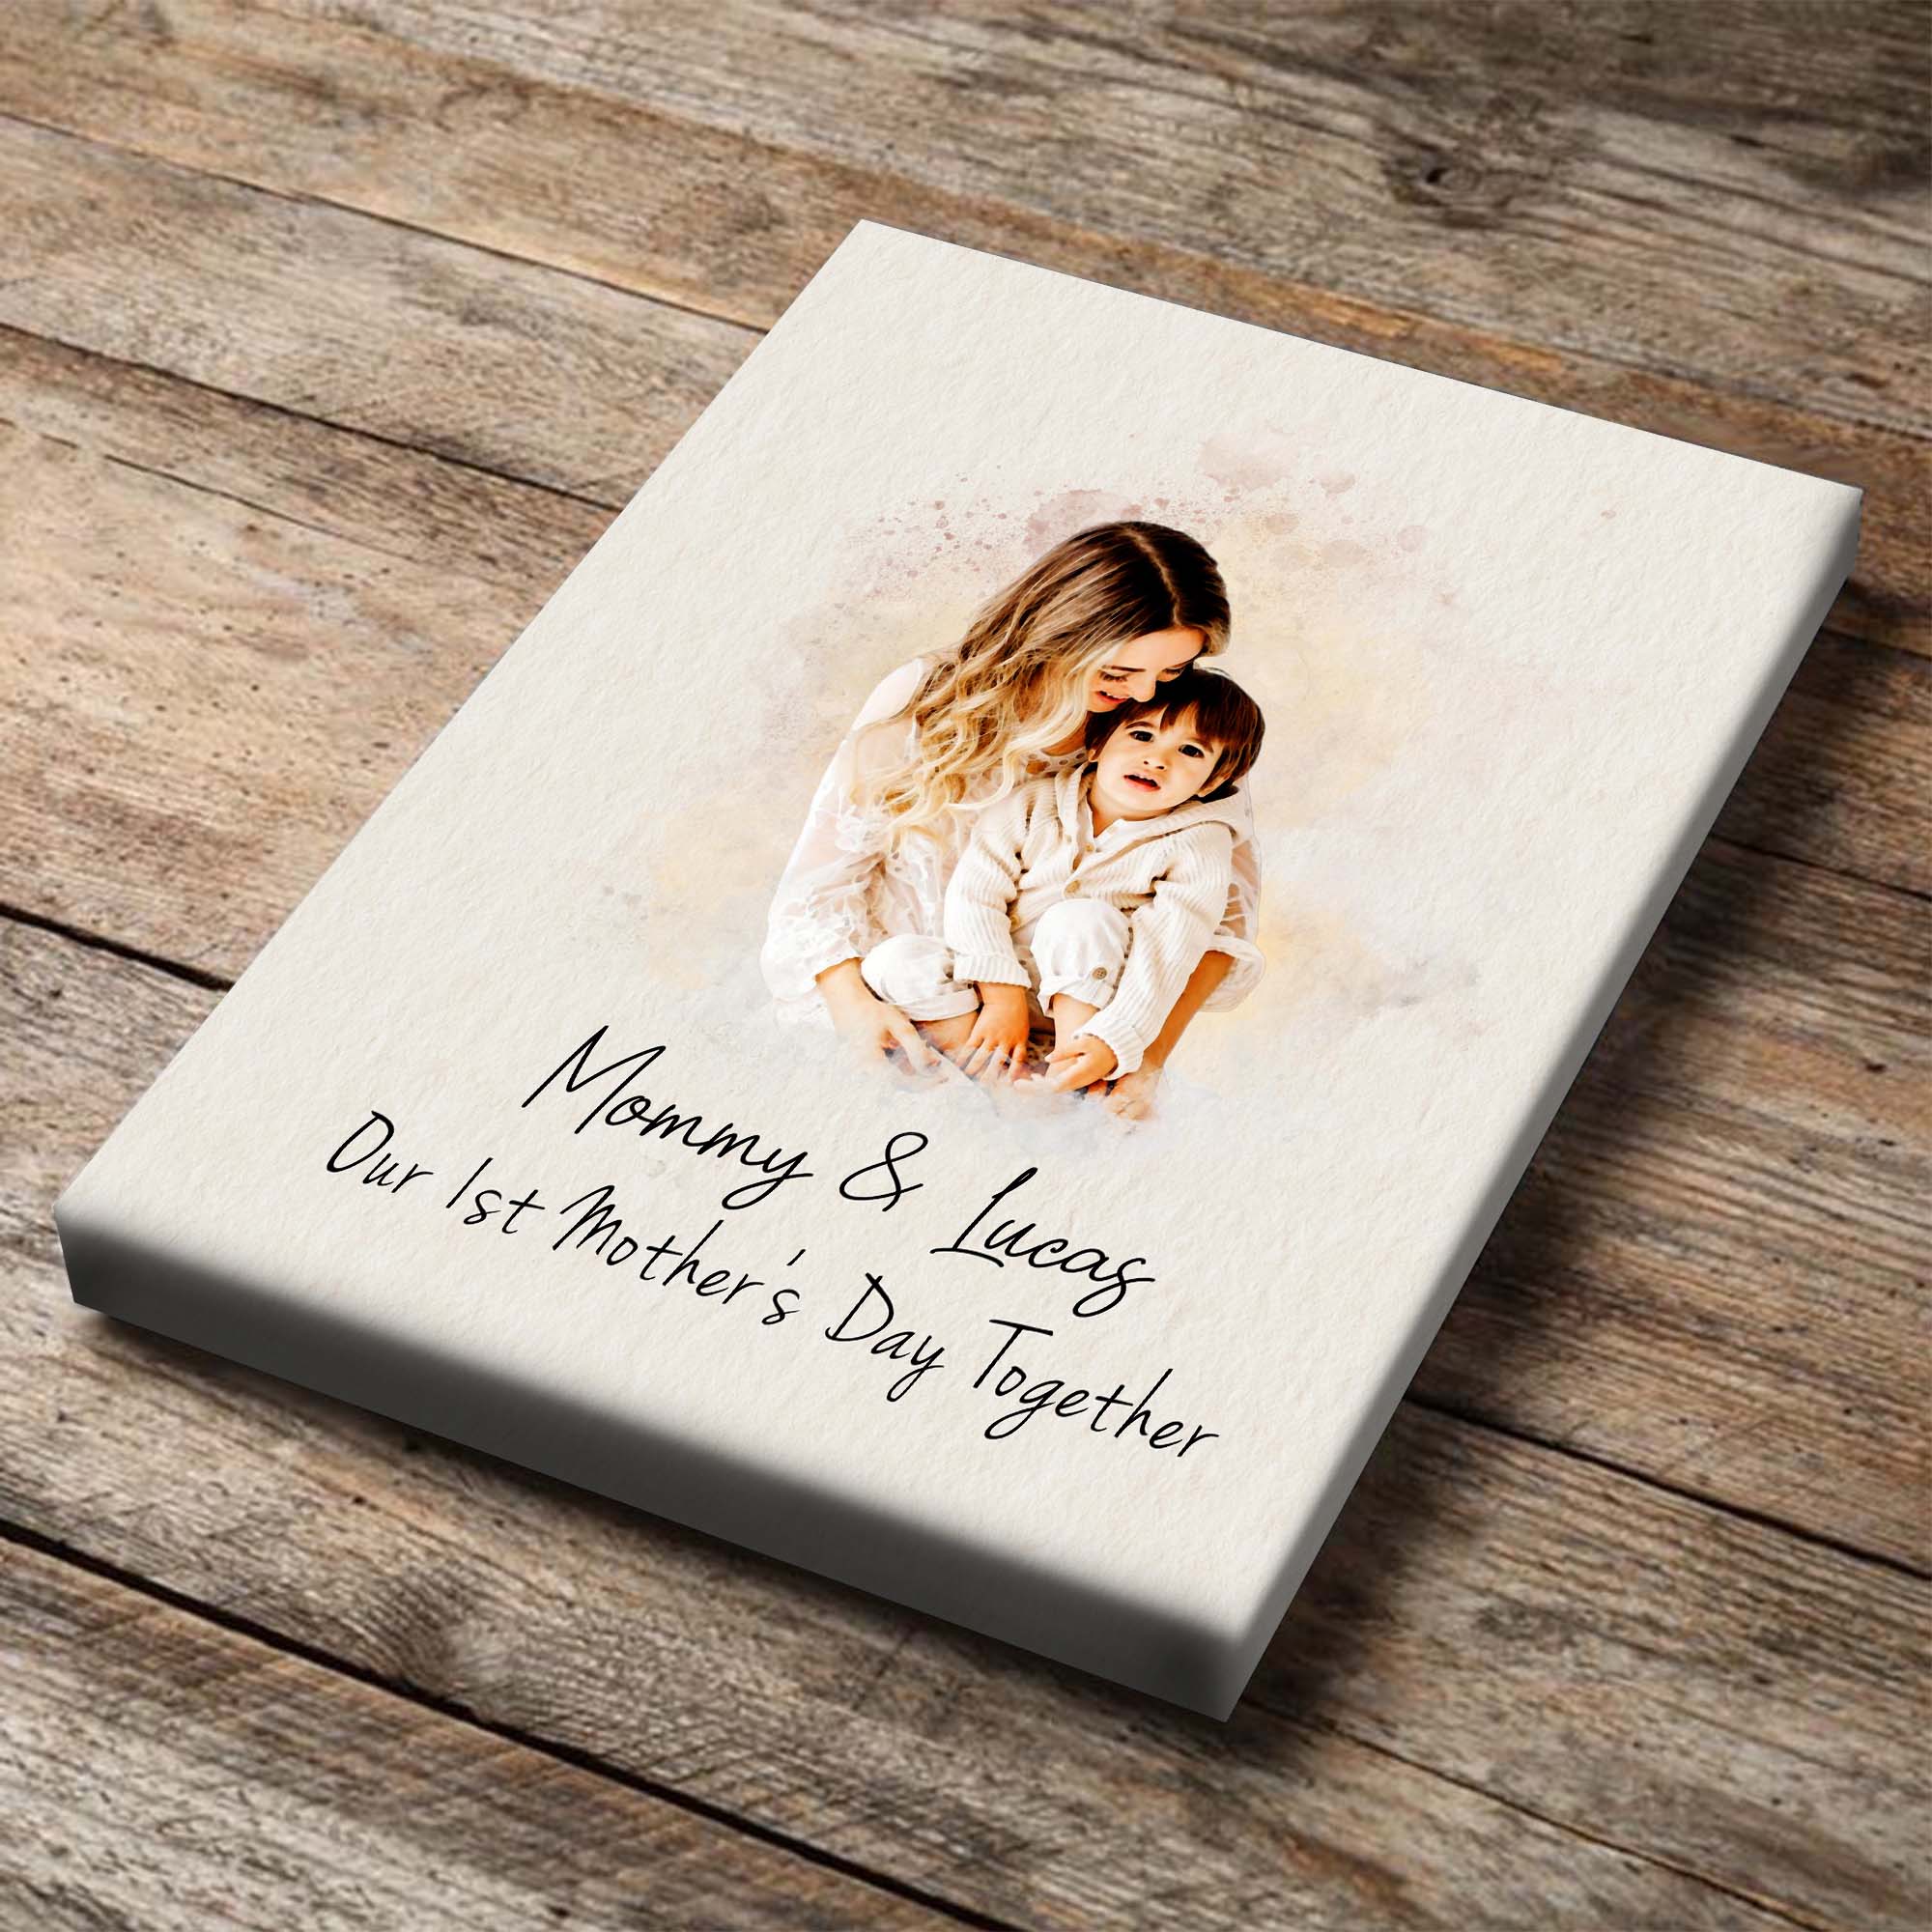 Custom Watercolor Photo Canvas Mothers Day Gifts